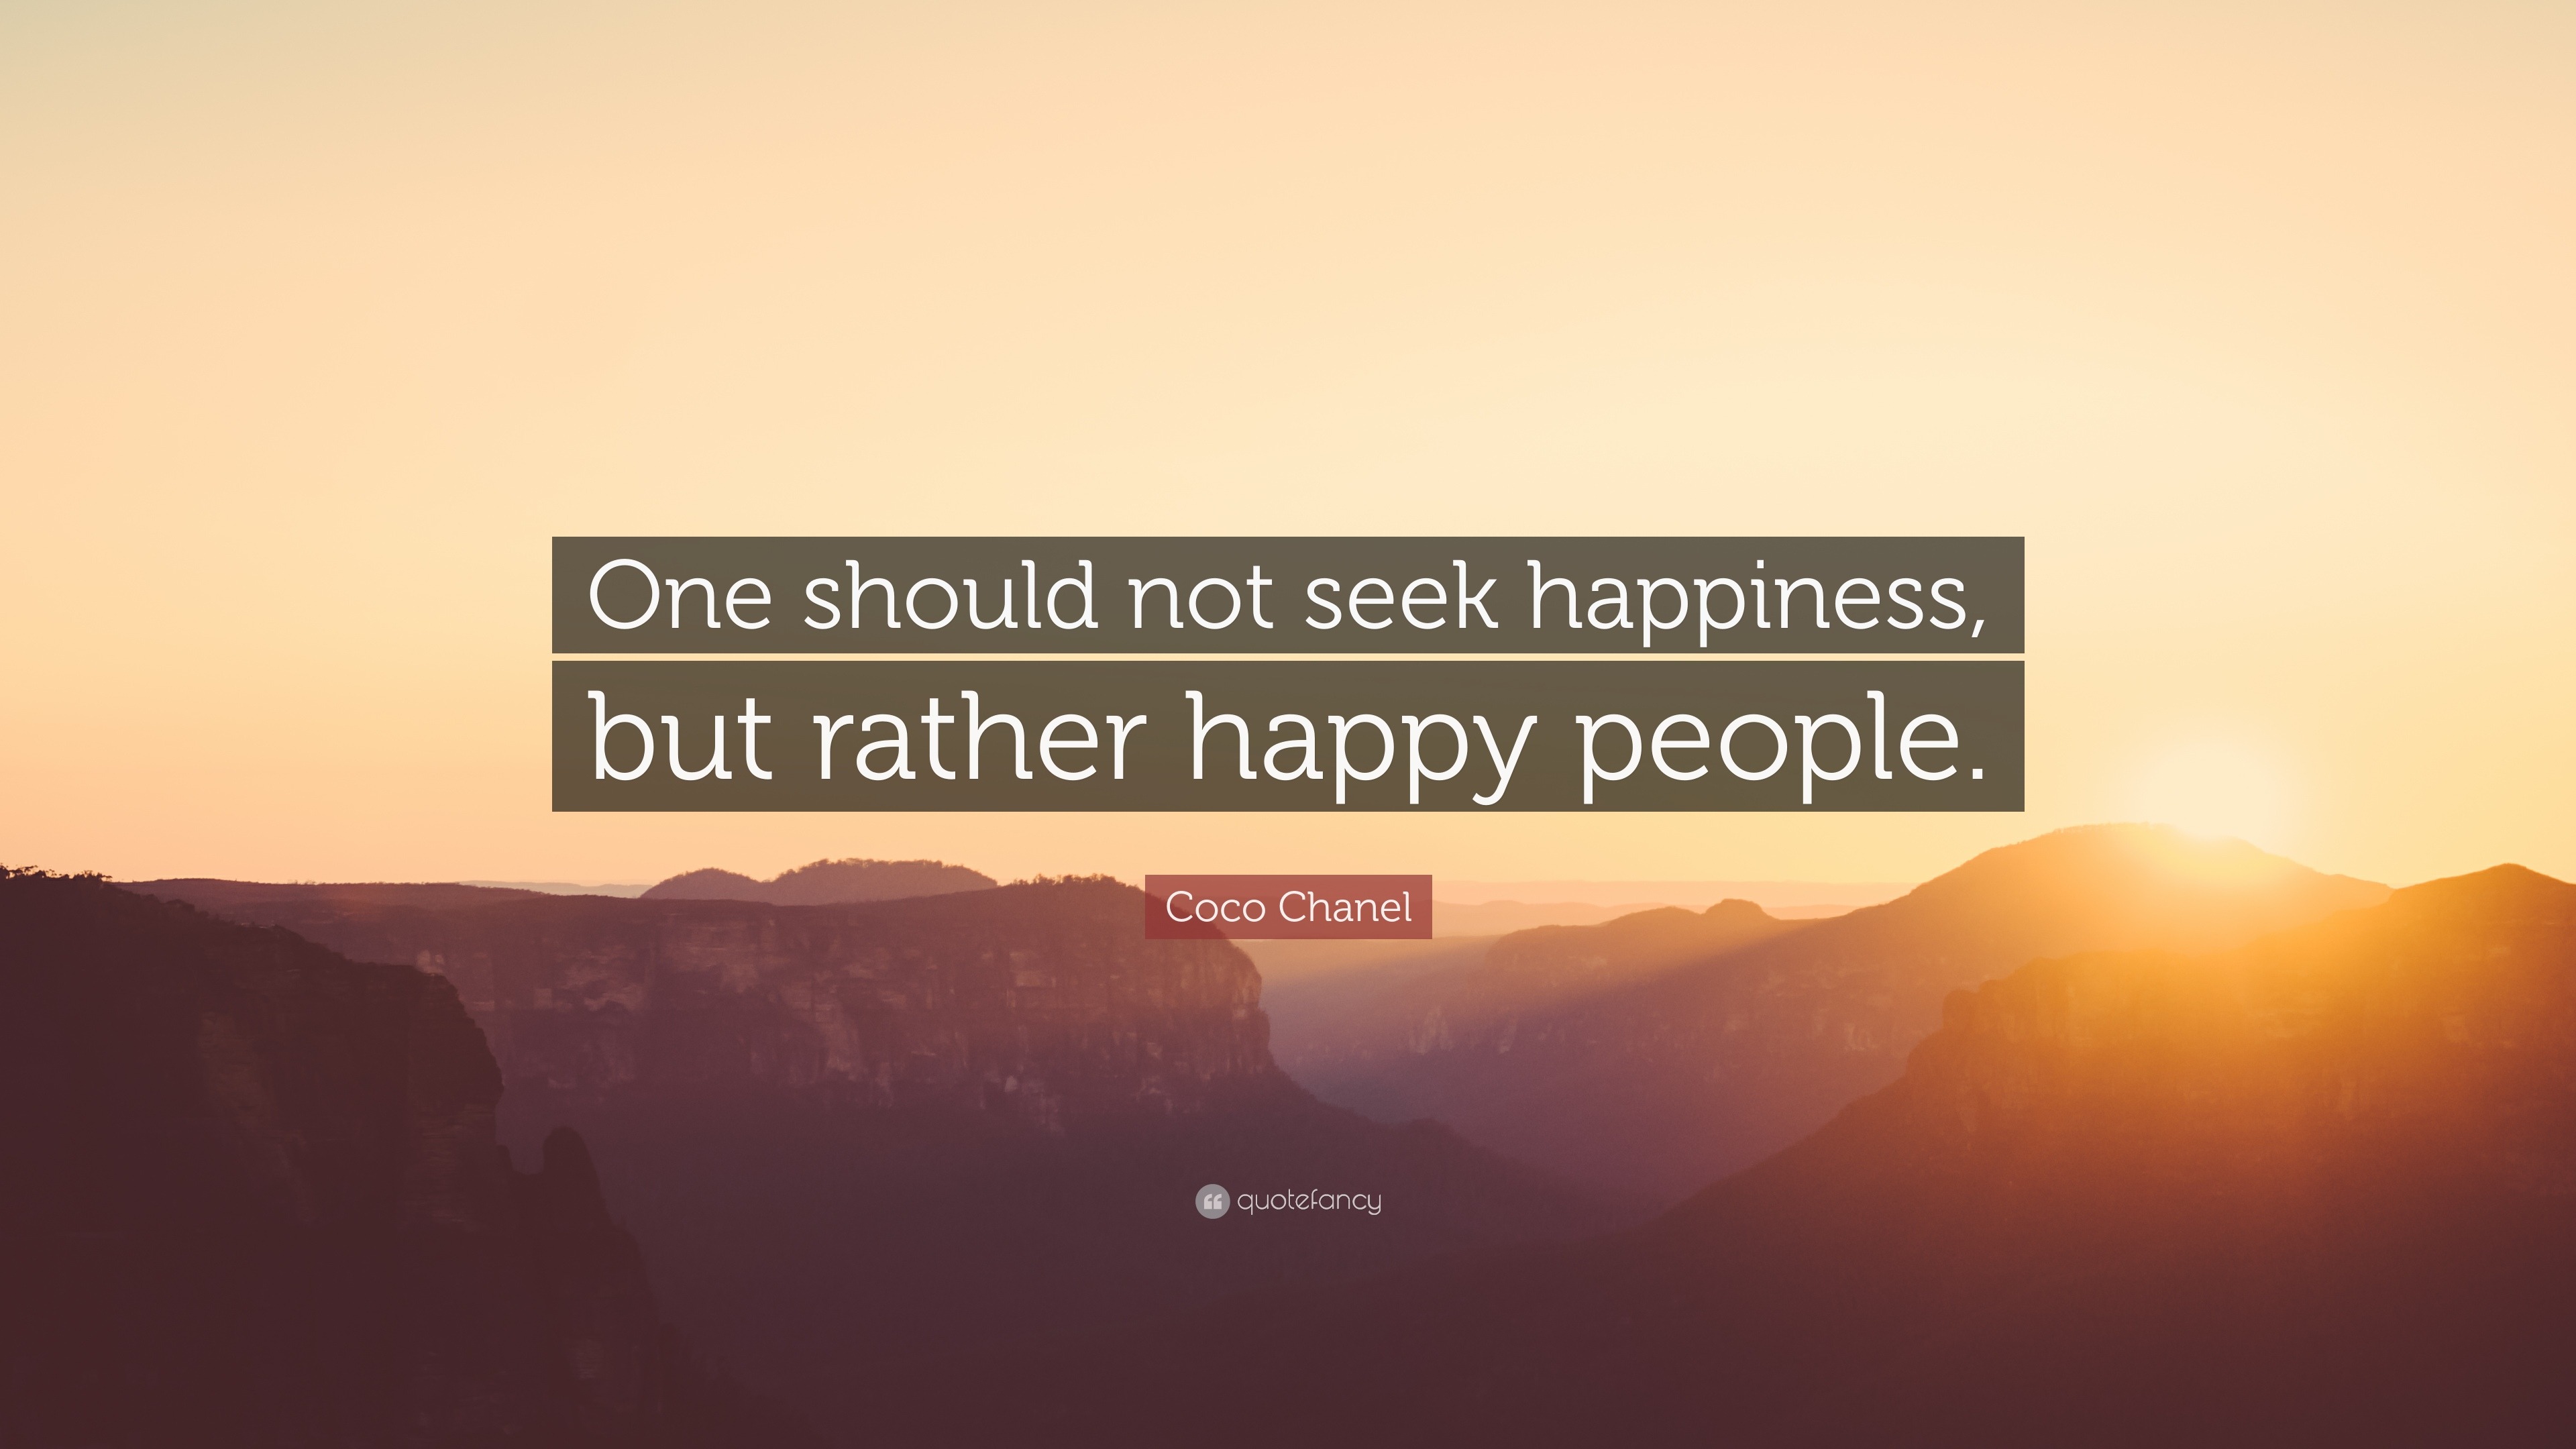 Coco Chanel Quote: “One should not seek happiness, but rather happy ...